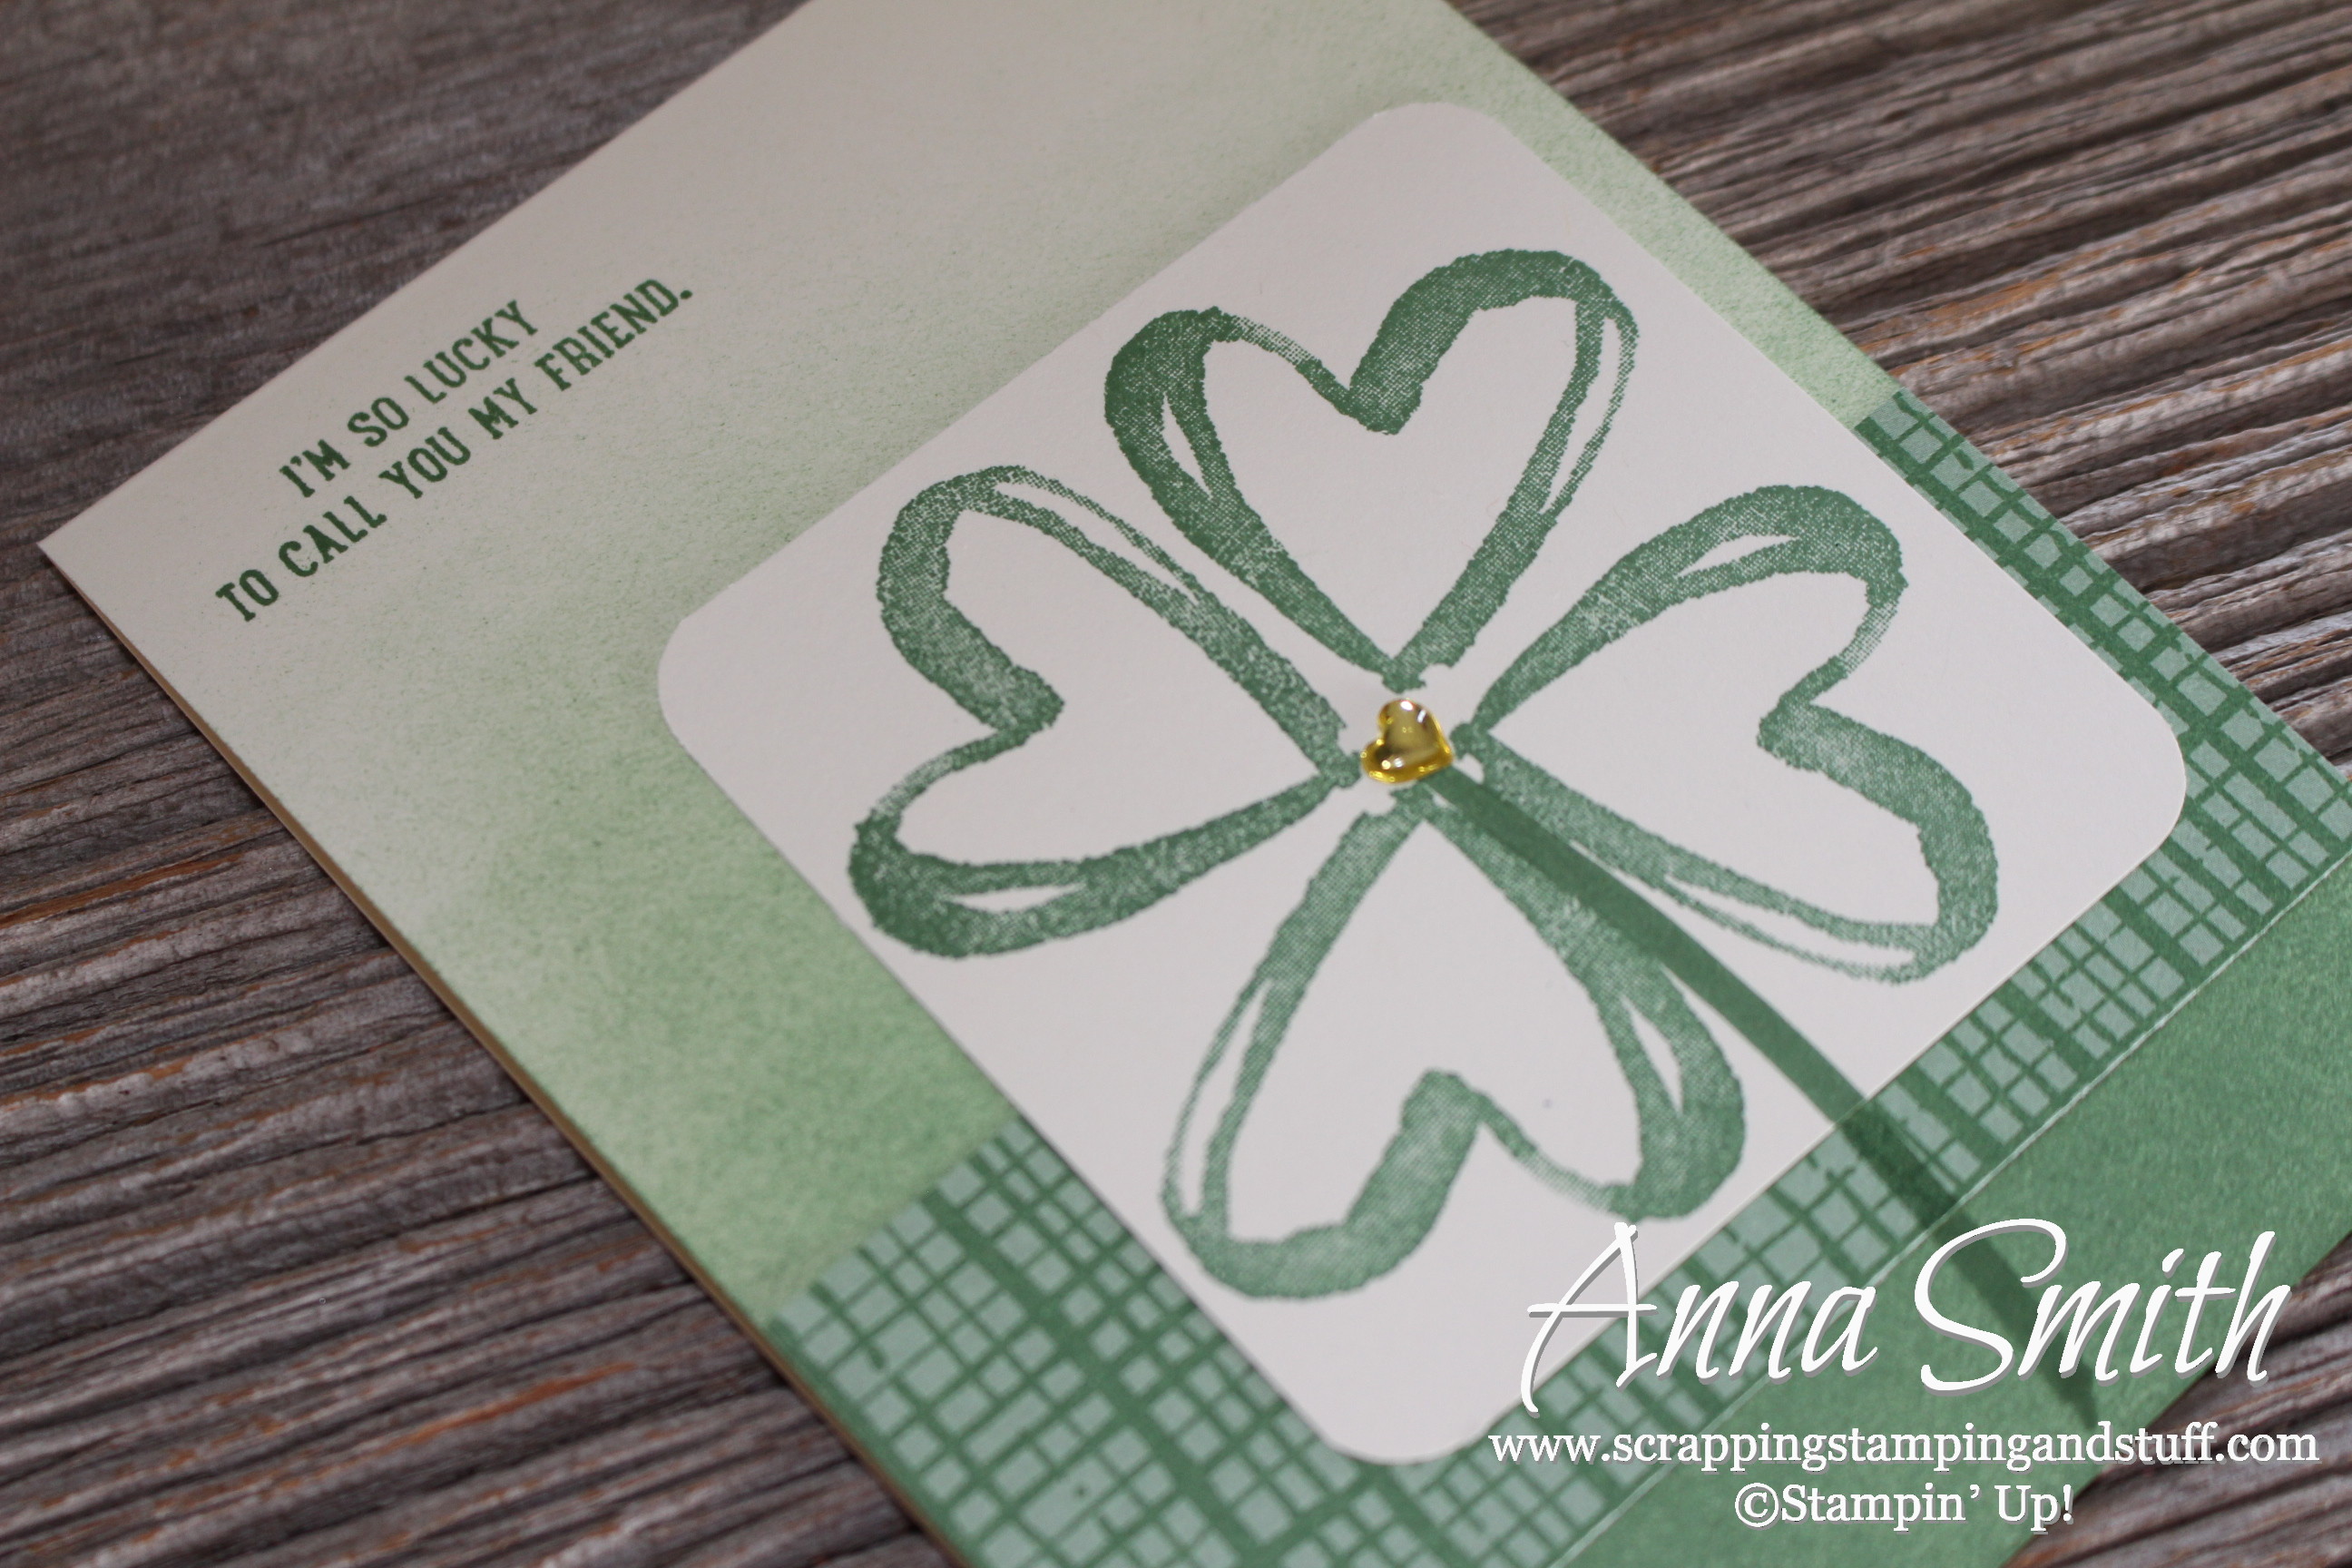 A St. Patrick’s Day Card Idea…Now?